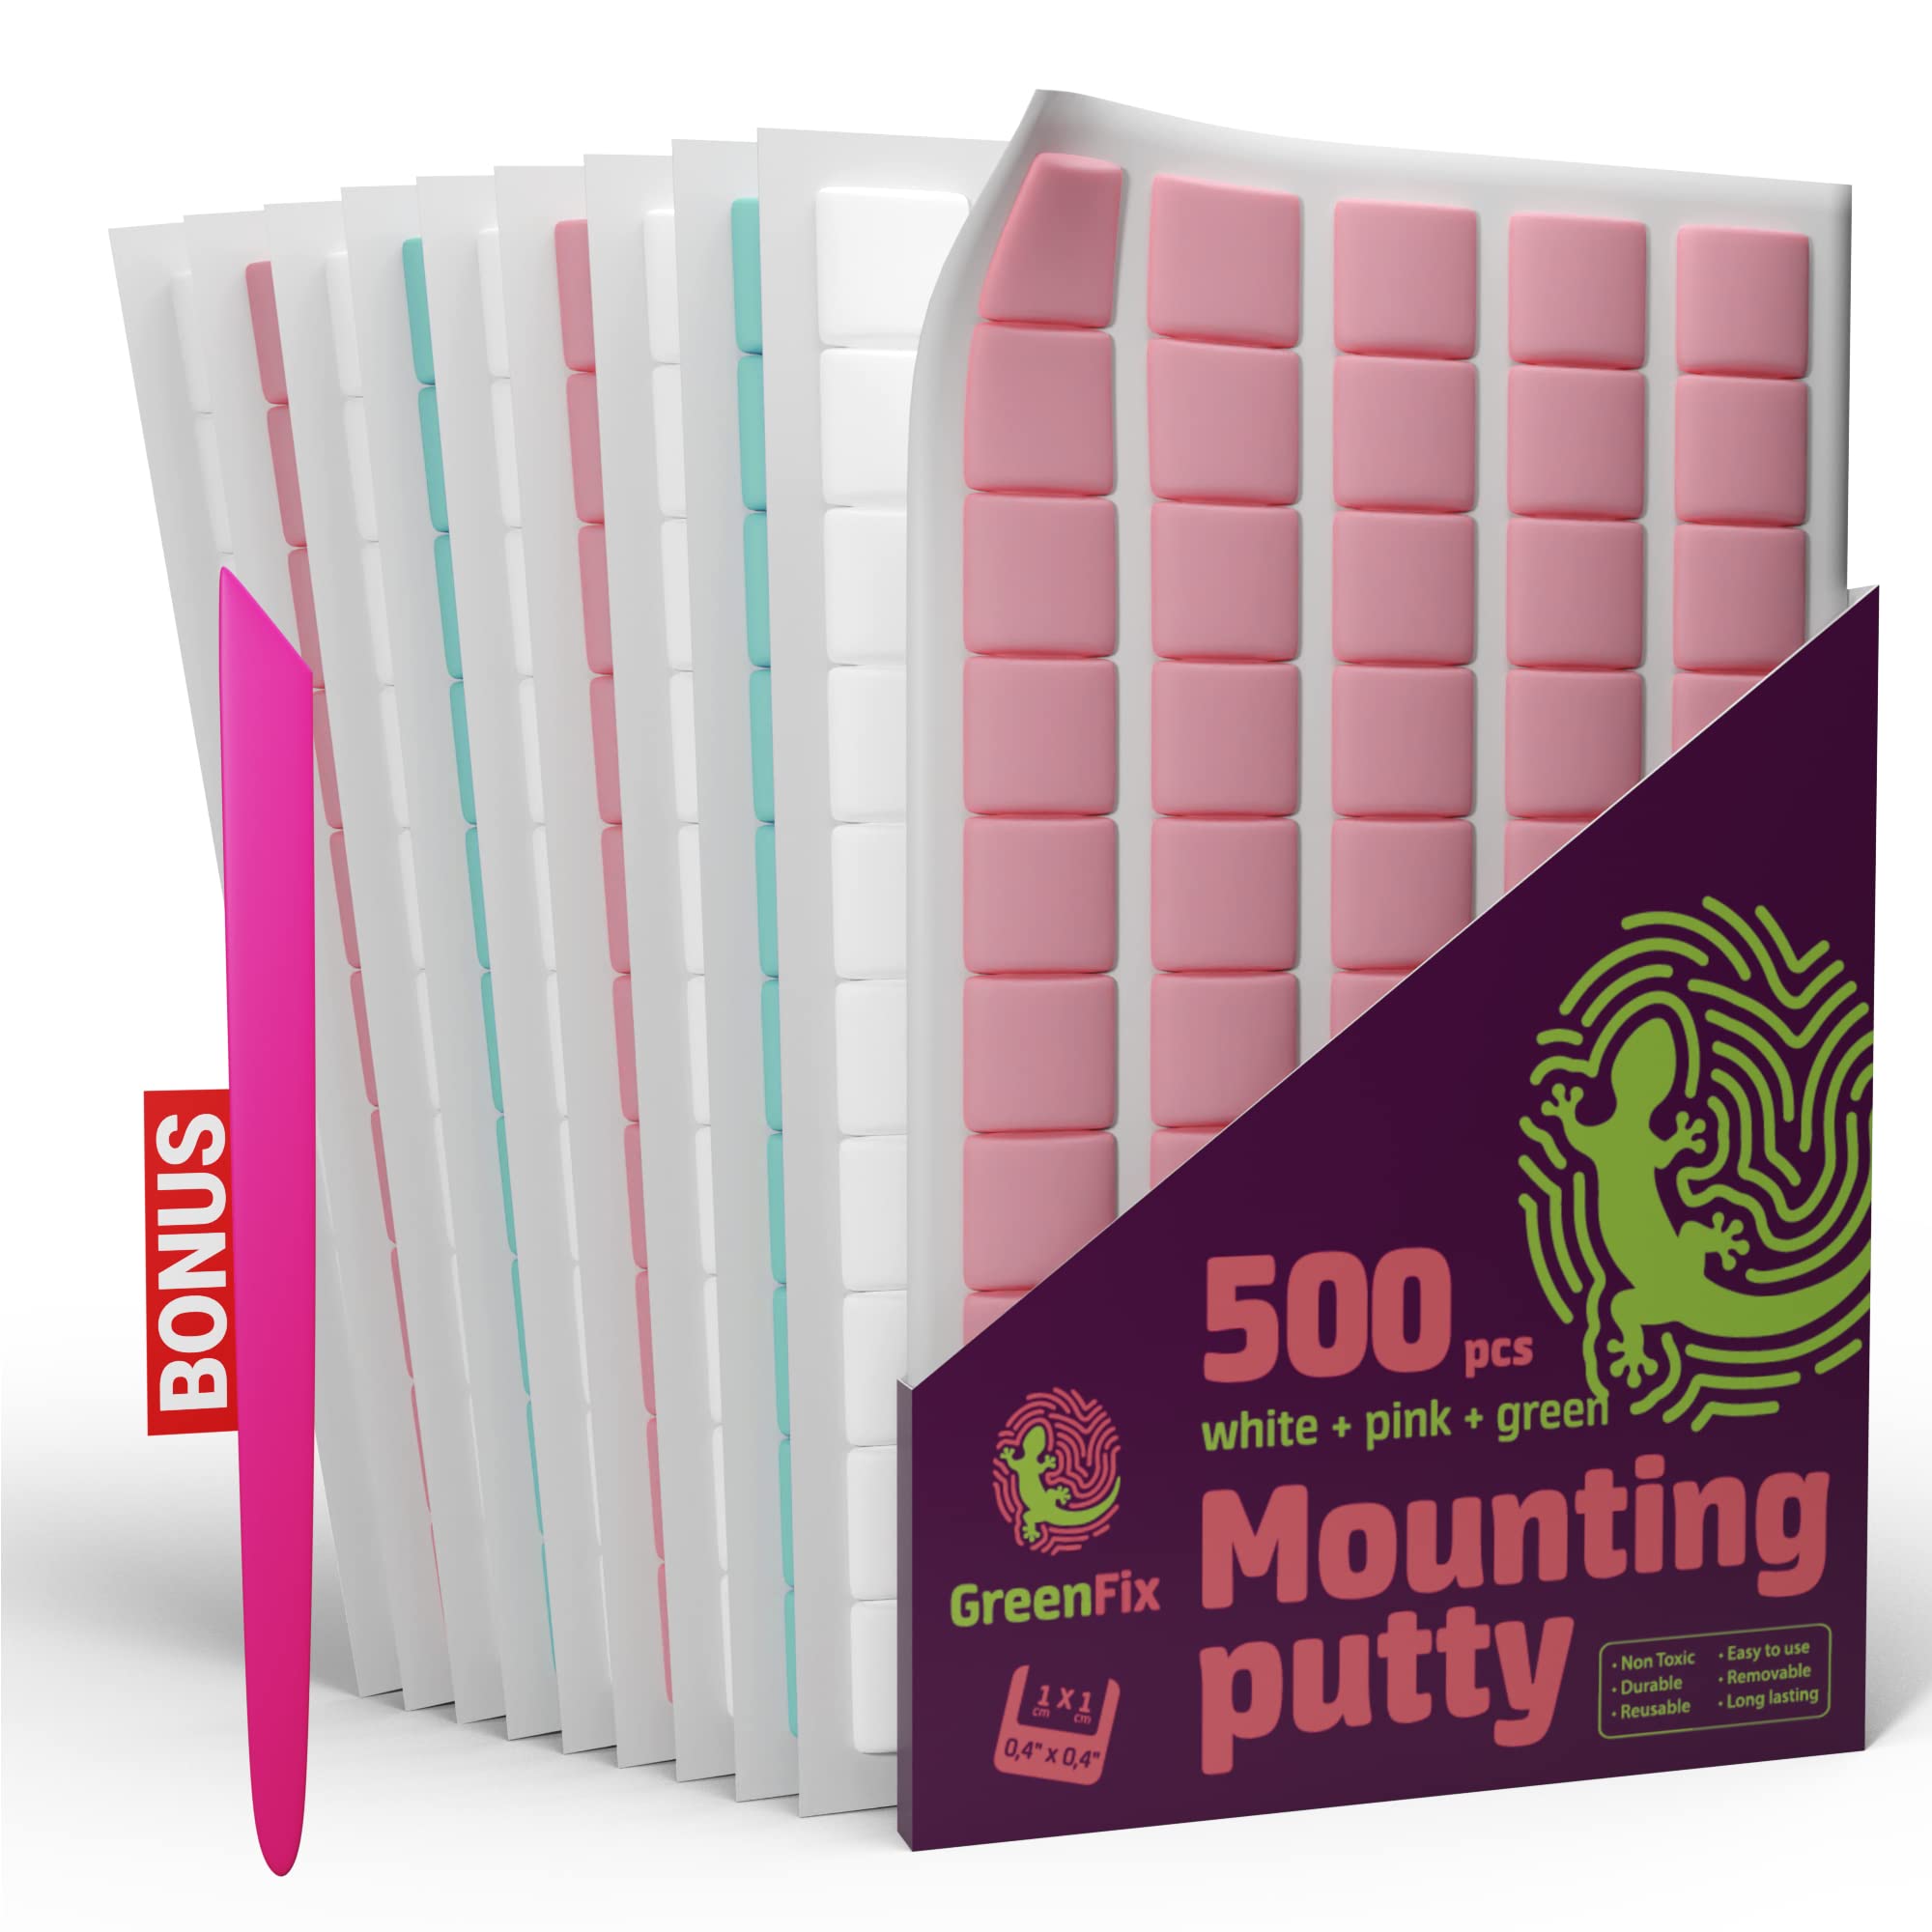 GreenFix Mounting Putty Removable - 500PCs Sticky Tack for Wall Hanging - Reusable Colorful Poster Putty - Wall Tack Sticky Putty - Adhesive Putty for Poster Picture Hanging Crafts